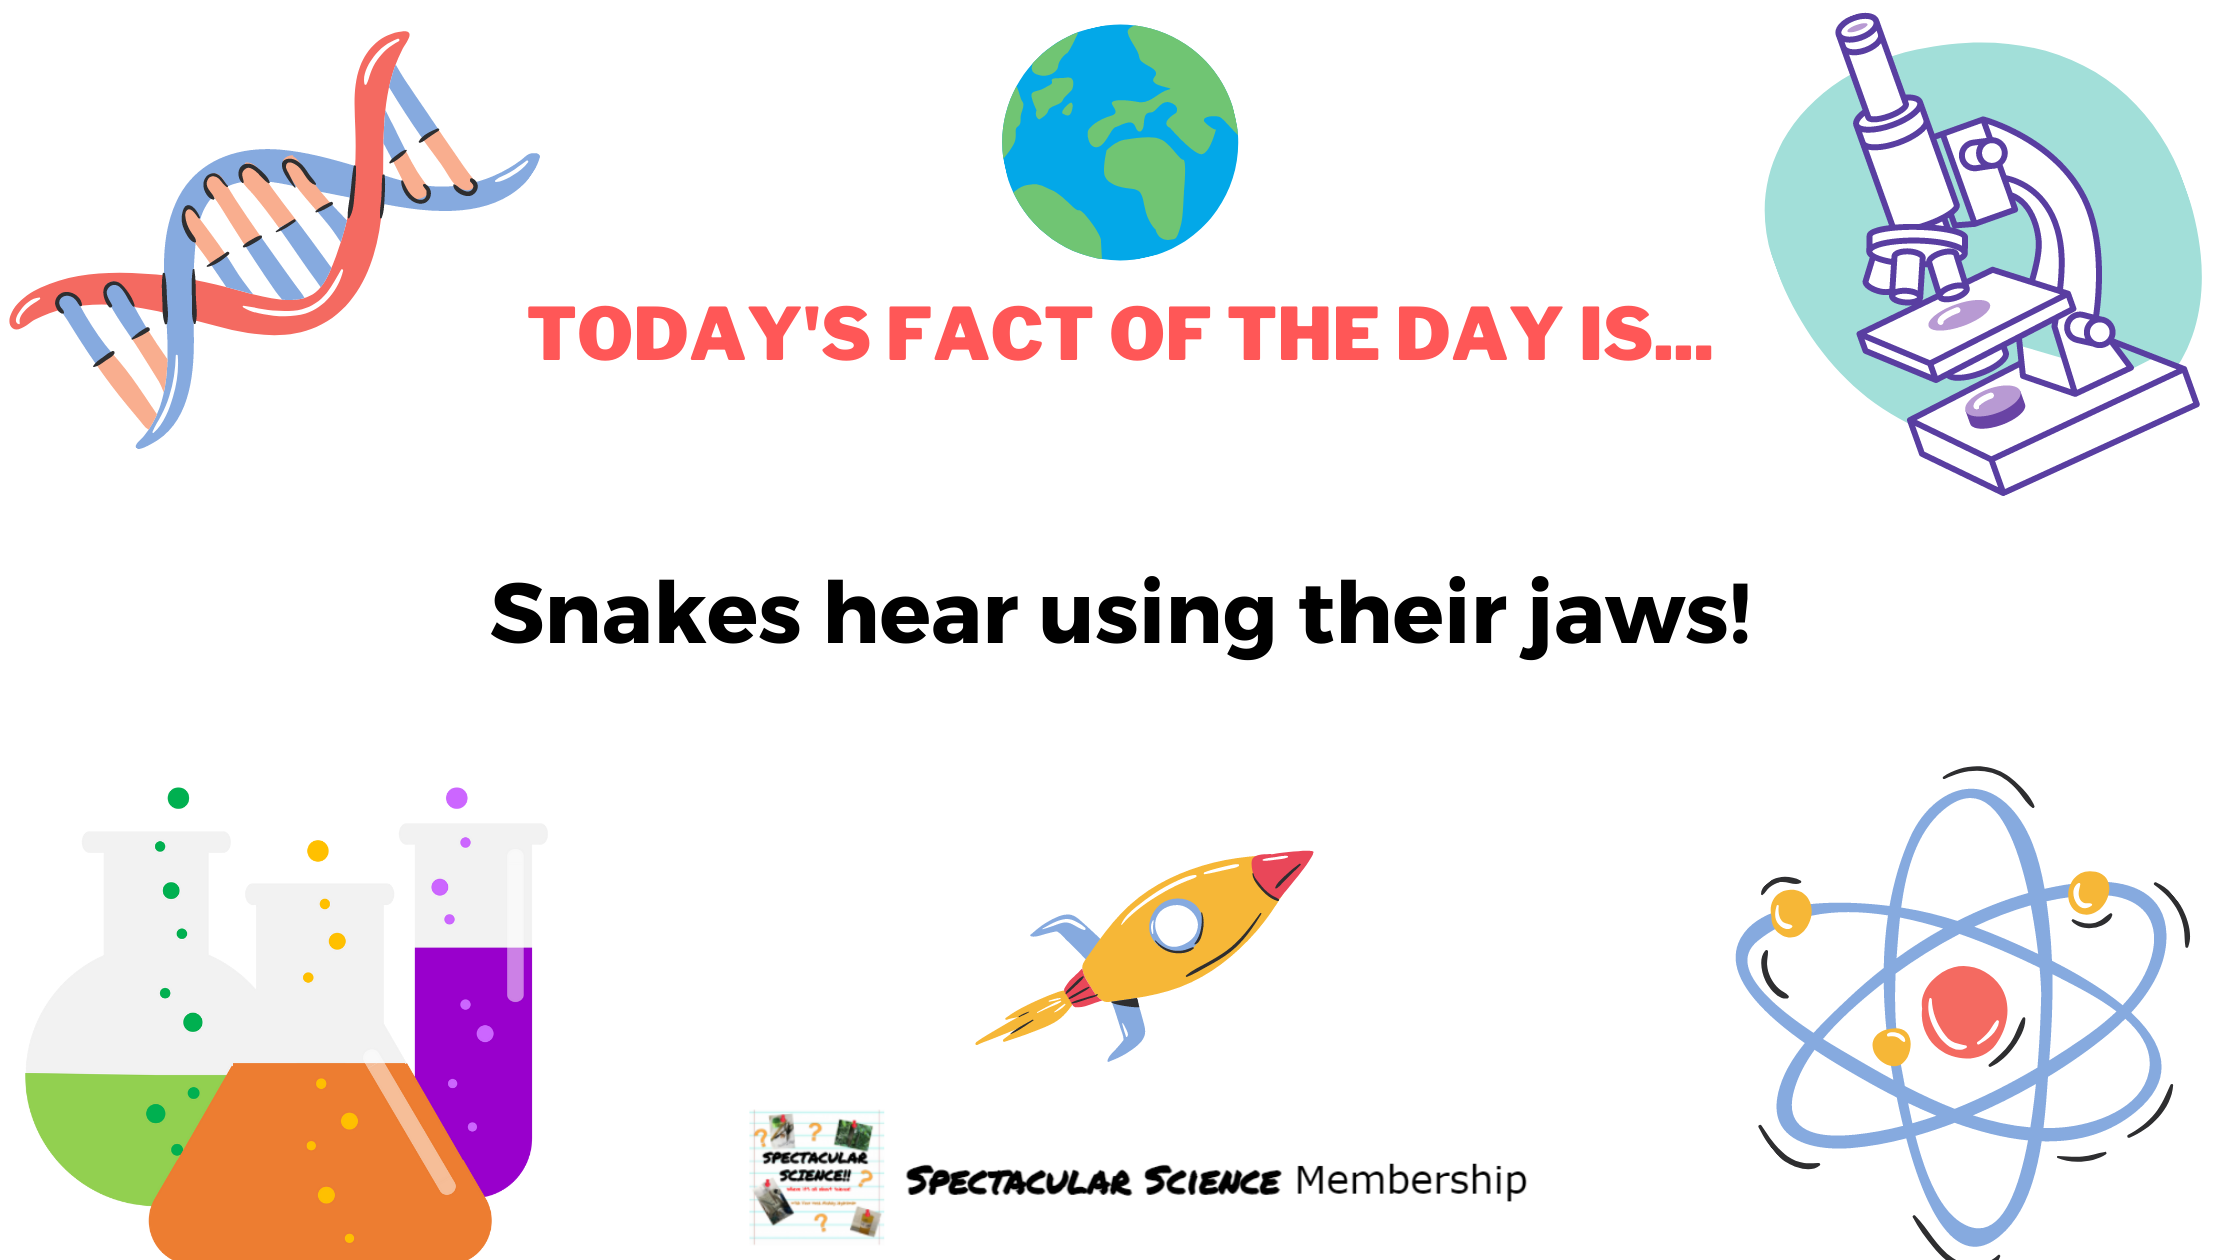 Fact of the Day Image Jan. 23rd